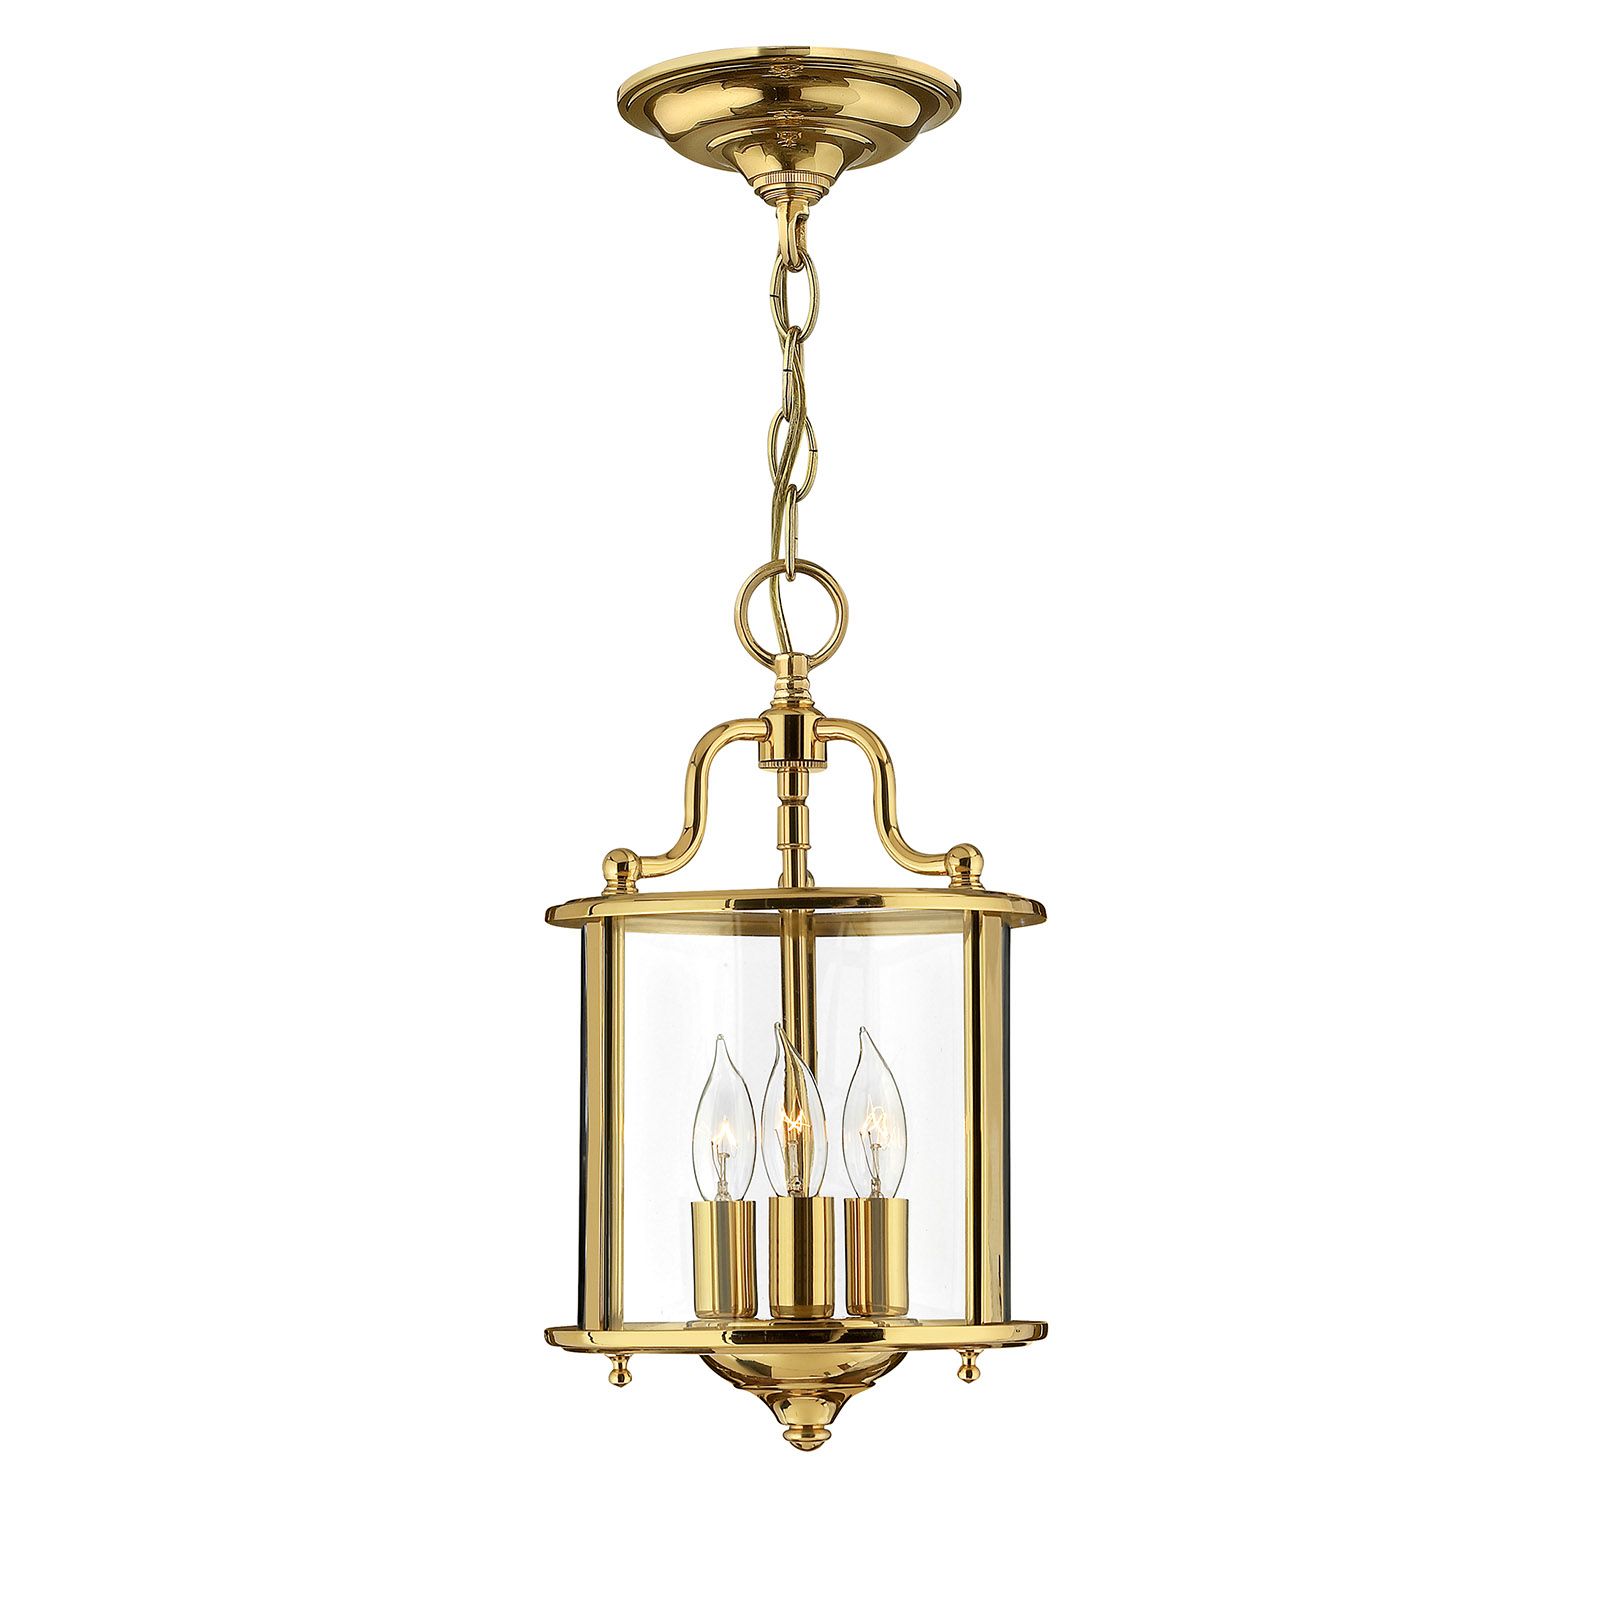 Gentry small pendant in polished brass